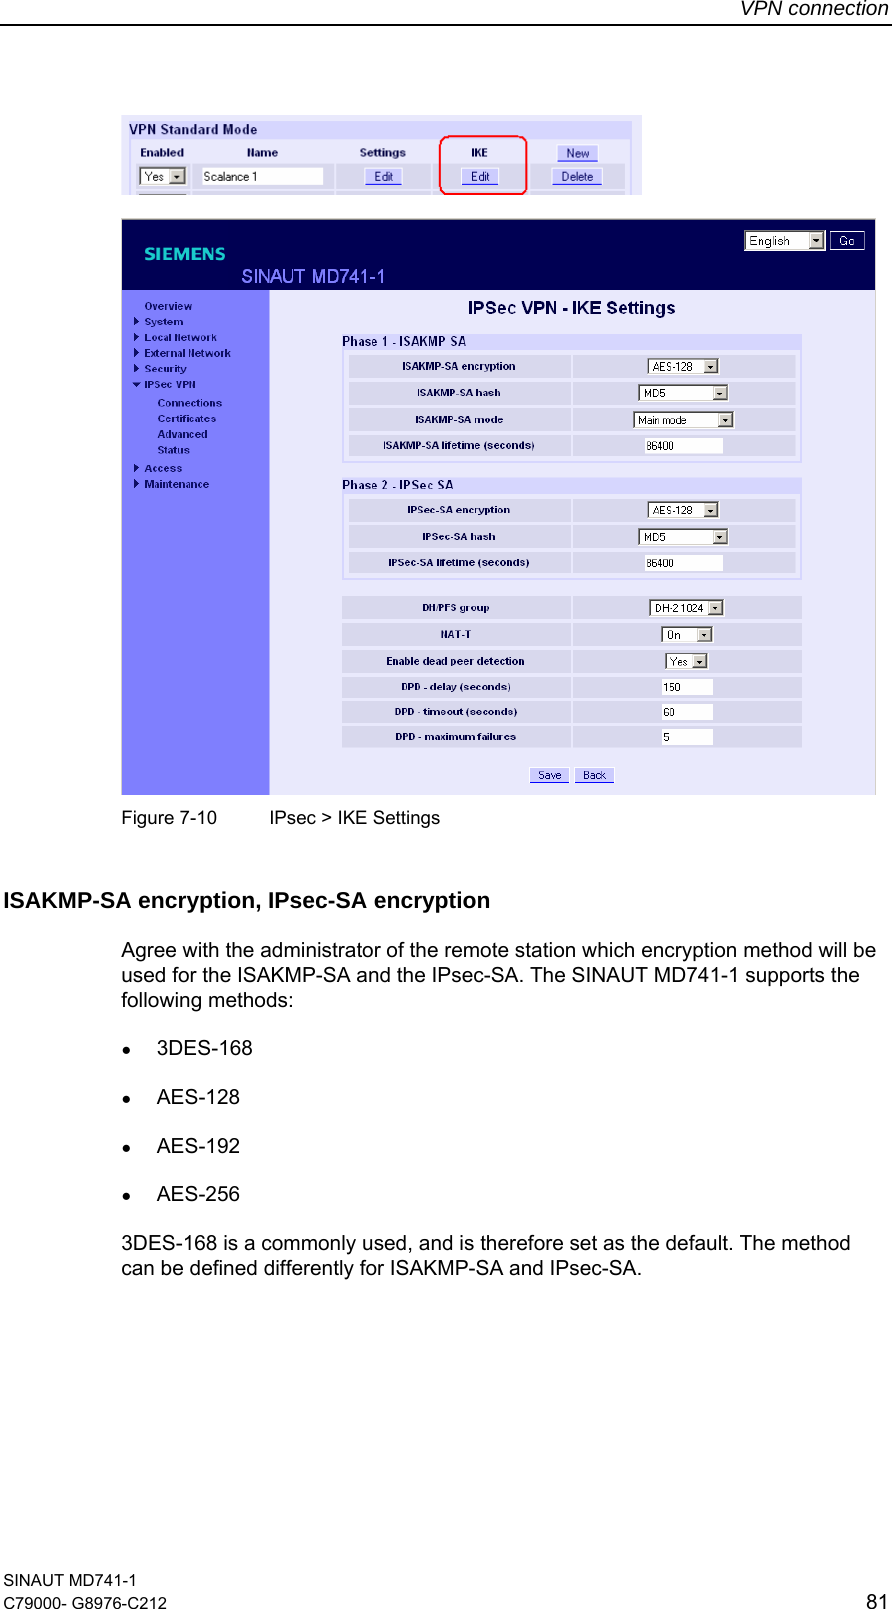 VPN connection SINAUT MD741-1 C79000- G8976-C212  81       Figure 7-10  IPsec &gt; IKE Settings ISAKMP-SA encryption, IPsec-SA encryption Agree with the administrator of the remote station which encryption method will be used for the ISAKMP-SA and the IPsec-SA. The SINAUT MD741-1 supports the following methods: ● 3DES-168 ● AES-128 ● AES-192 ● AES-256 3DES-168 is a commonly used, and is therefore set as the default. The method can be defined differently for ISAKMP-SA and IPsec-SA. 